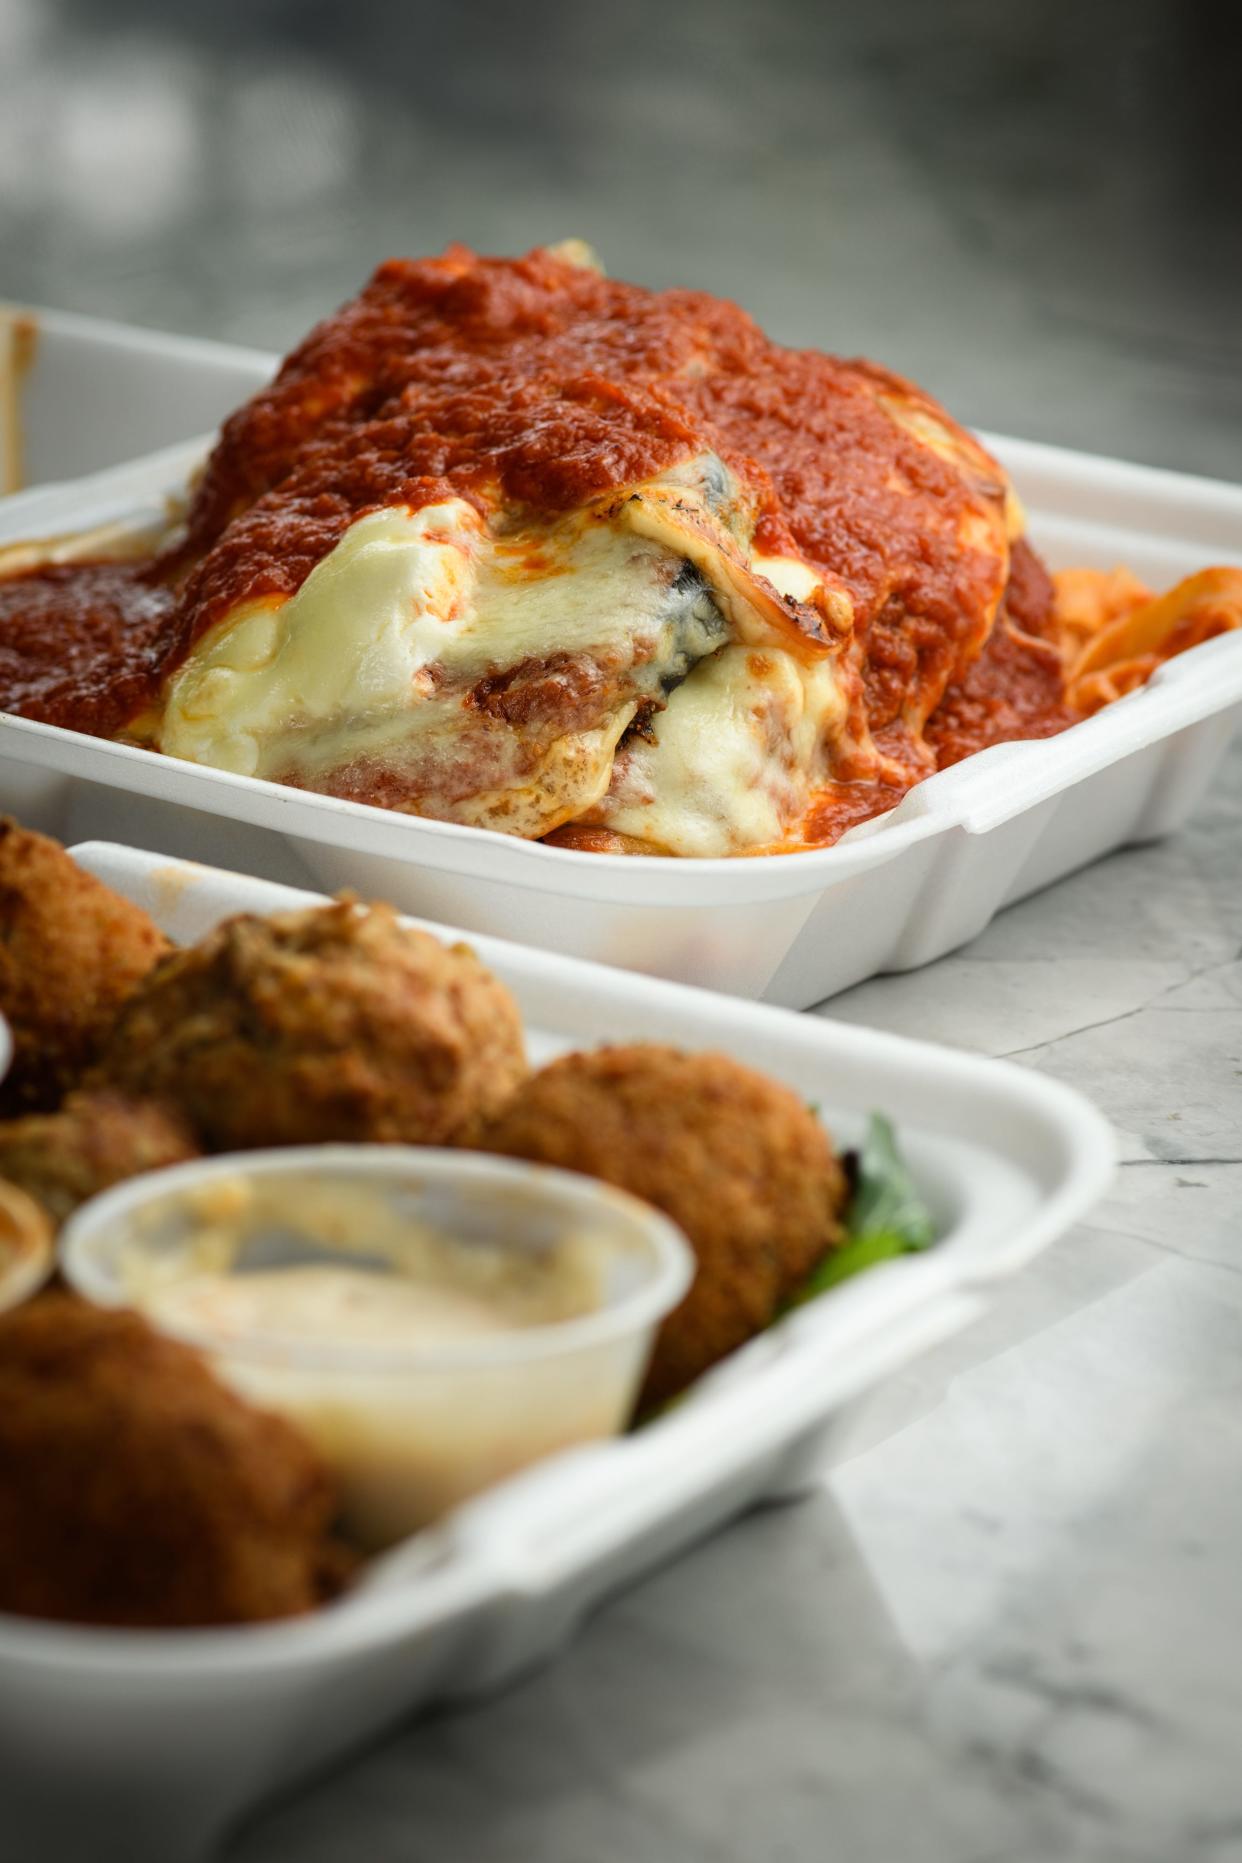 Eggplant and chicken parm from the Bella Nonna food truck.